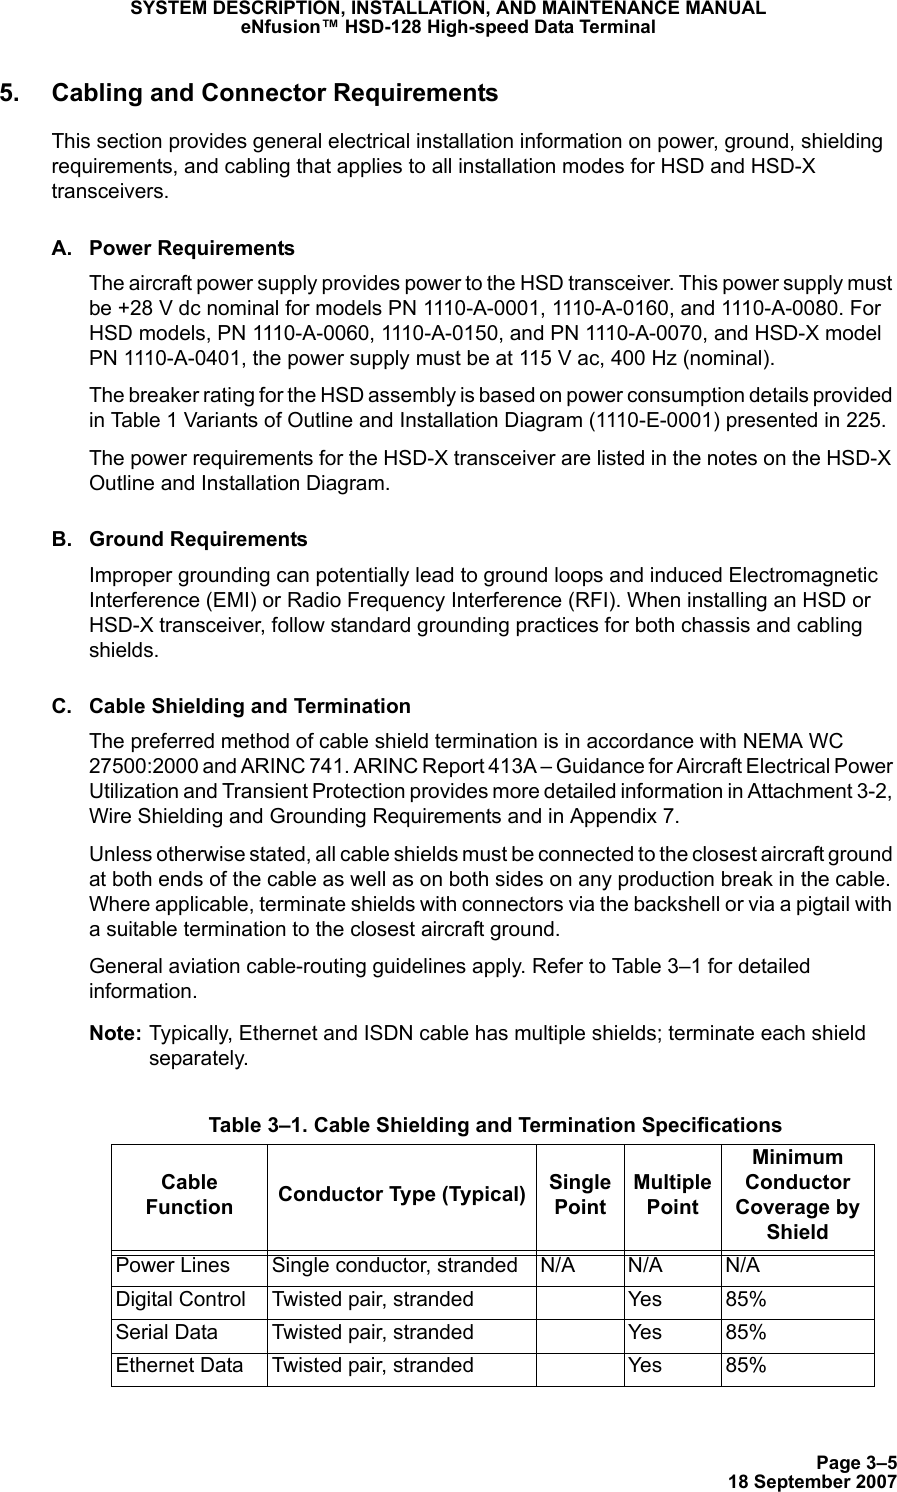 Page 3–518 September 2007SYSTEM DESCRIPTION, INSTALLATION, AND MAINTENANCE MANUALeNfusion™ HSD-128 High-speed Data Terminal5. Cabling and Connector RequirementsThis section provides general electrical installation information on power, ground, shielding requirements, and cabling that applies to all installation modes for HSD and HSD-X transceivers. A. Power RequirementsThe aircraft power supply provides power to the HSD transceiver. This power supply must be +28 V dc nominal for models PN 1110-A-0001, 1110-A-0160, and 1110-A-0080. For HSD models, PN 1110-A-0060, 1110-A-0150, and PN 1110-A-0070, and HSD-X model PN 1110-A-0401, the power supply must be at 115 V ac, 400 Hz (nominal). The breaker rating for the HSD assembly is based on power consumption details provided in Table 1 Variants of Outline and Installation Diagram (1110-E-0001) presented in 225. The power requirements for the HSD-X transceiver are listed in the notes on the HSD-X Outline and Installation Diagram.B. Ground RequirementsImproper grounding can potentially lead to ground loops and induced Electromagnetic Interference (EMI) or Radio Frequency Interference (RFI). When installing an HSD or HSD-X transceiver, follow standard grounding practices for both chassis and cabling shields.C. Cable Shielding and Termination The preferred method of cable shield termination is in accordance with NEMA WC 27500:2000 and ARINC 741. ARINC Report 413A – Guidance for Aircraft Electrical Power Utilization and Transient Protection provides more detailed information in Attachment 3-2, Wire Shielding and Grounding Requirements and in Appendix 7.Unless otherwise stated, all cable shields must be connected to the closest aircraft ground at both ends of the cable as well as on both sides on any production break in the cable. Where applicable, terminate shields with connectors via the backshell or via a pigtail with a suitable termination to the closest aircraft ground. General aviation cable-routing guidelines apply. Refer to Table 3–1 for detailed information.Note: Typically, Ethernet and ISDN cable has multiple shields; terminate each shield separately.  Table 3–1. Cable Shielding and Termination SpecificationsCable Function Conductor Type (Typical) Single PointMultiple PointMinimum Conductor Coverage by ShieldPower Lines Single conductor, stranded N/A N/A N/ADigital Control Twisted pair, stranded Yes 85%Serial Data Twisted pair, stranded Yes 85%Ethernet Data Twisted pair, stranded Yes 85%